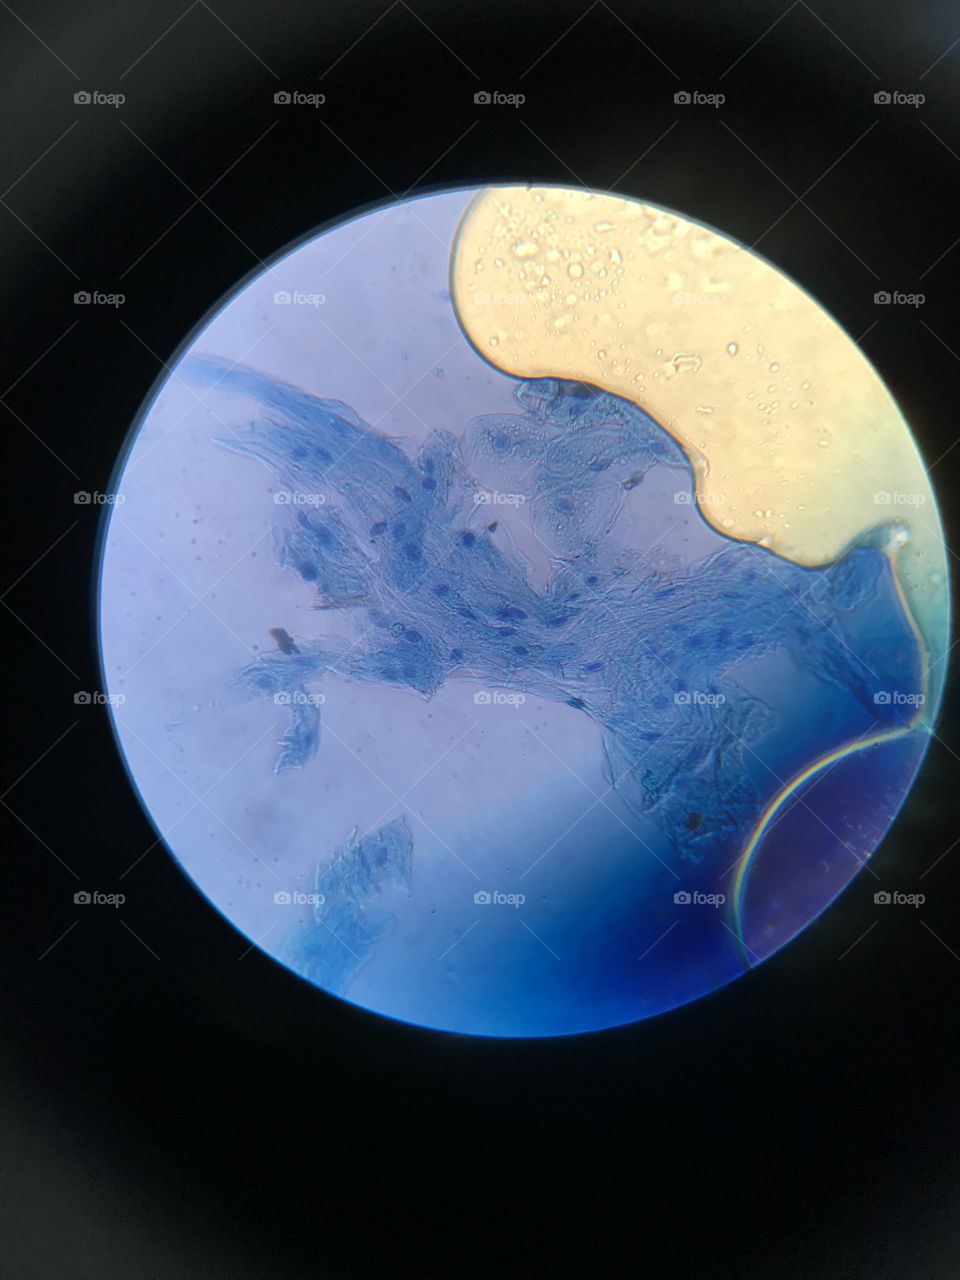 Blue stained cluster of cheek epithelial cells. Unique peek into the usually unseen. Cells with nuclei present make an awesome image for everyone especially science lovers to appreciate 